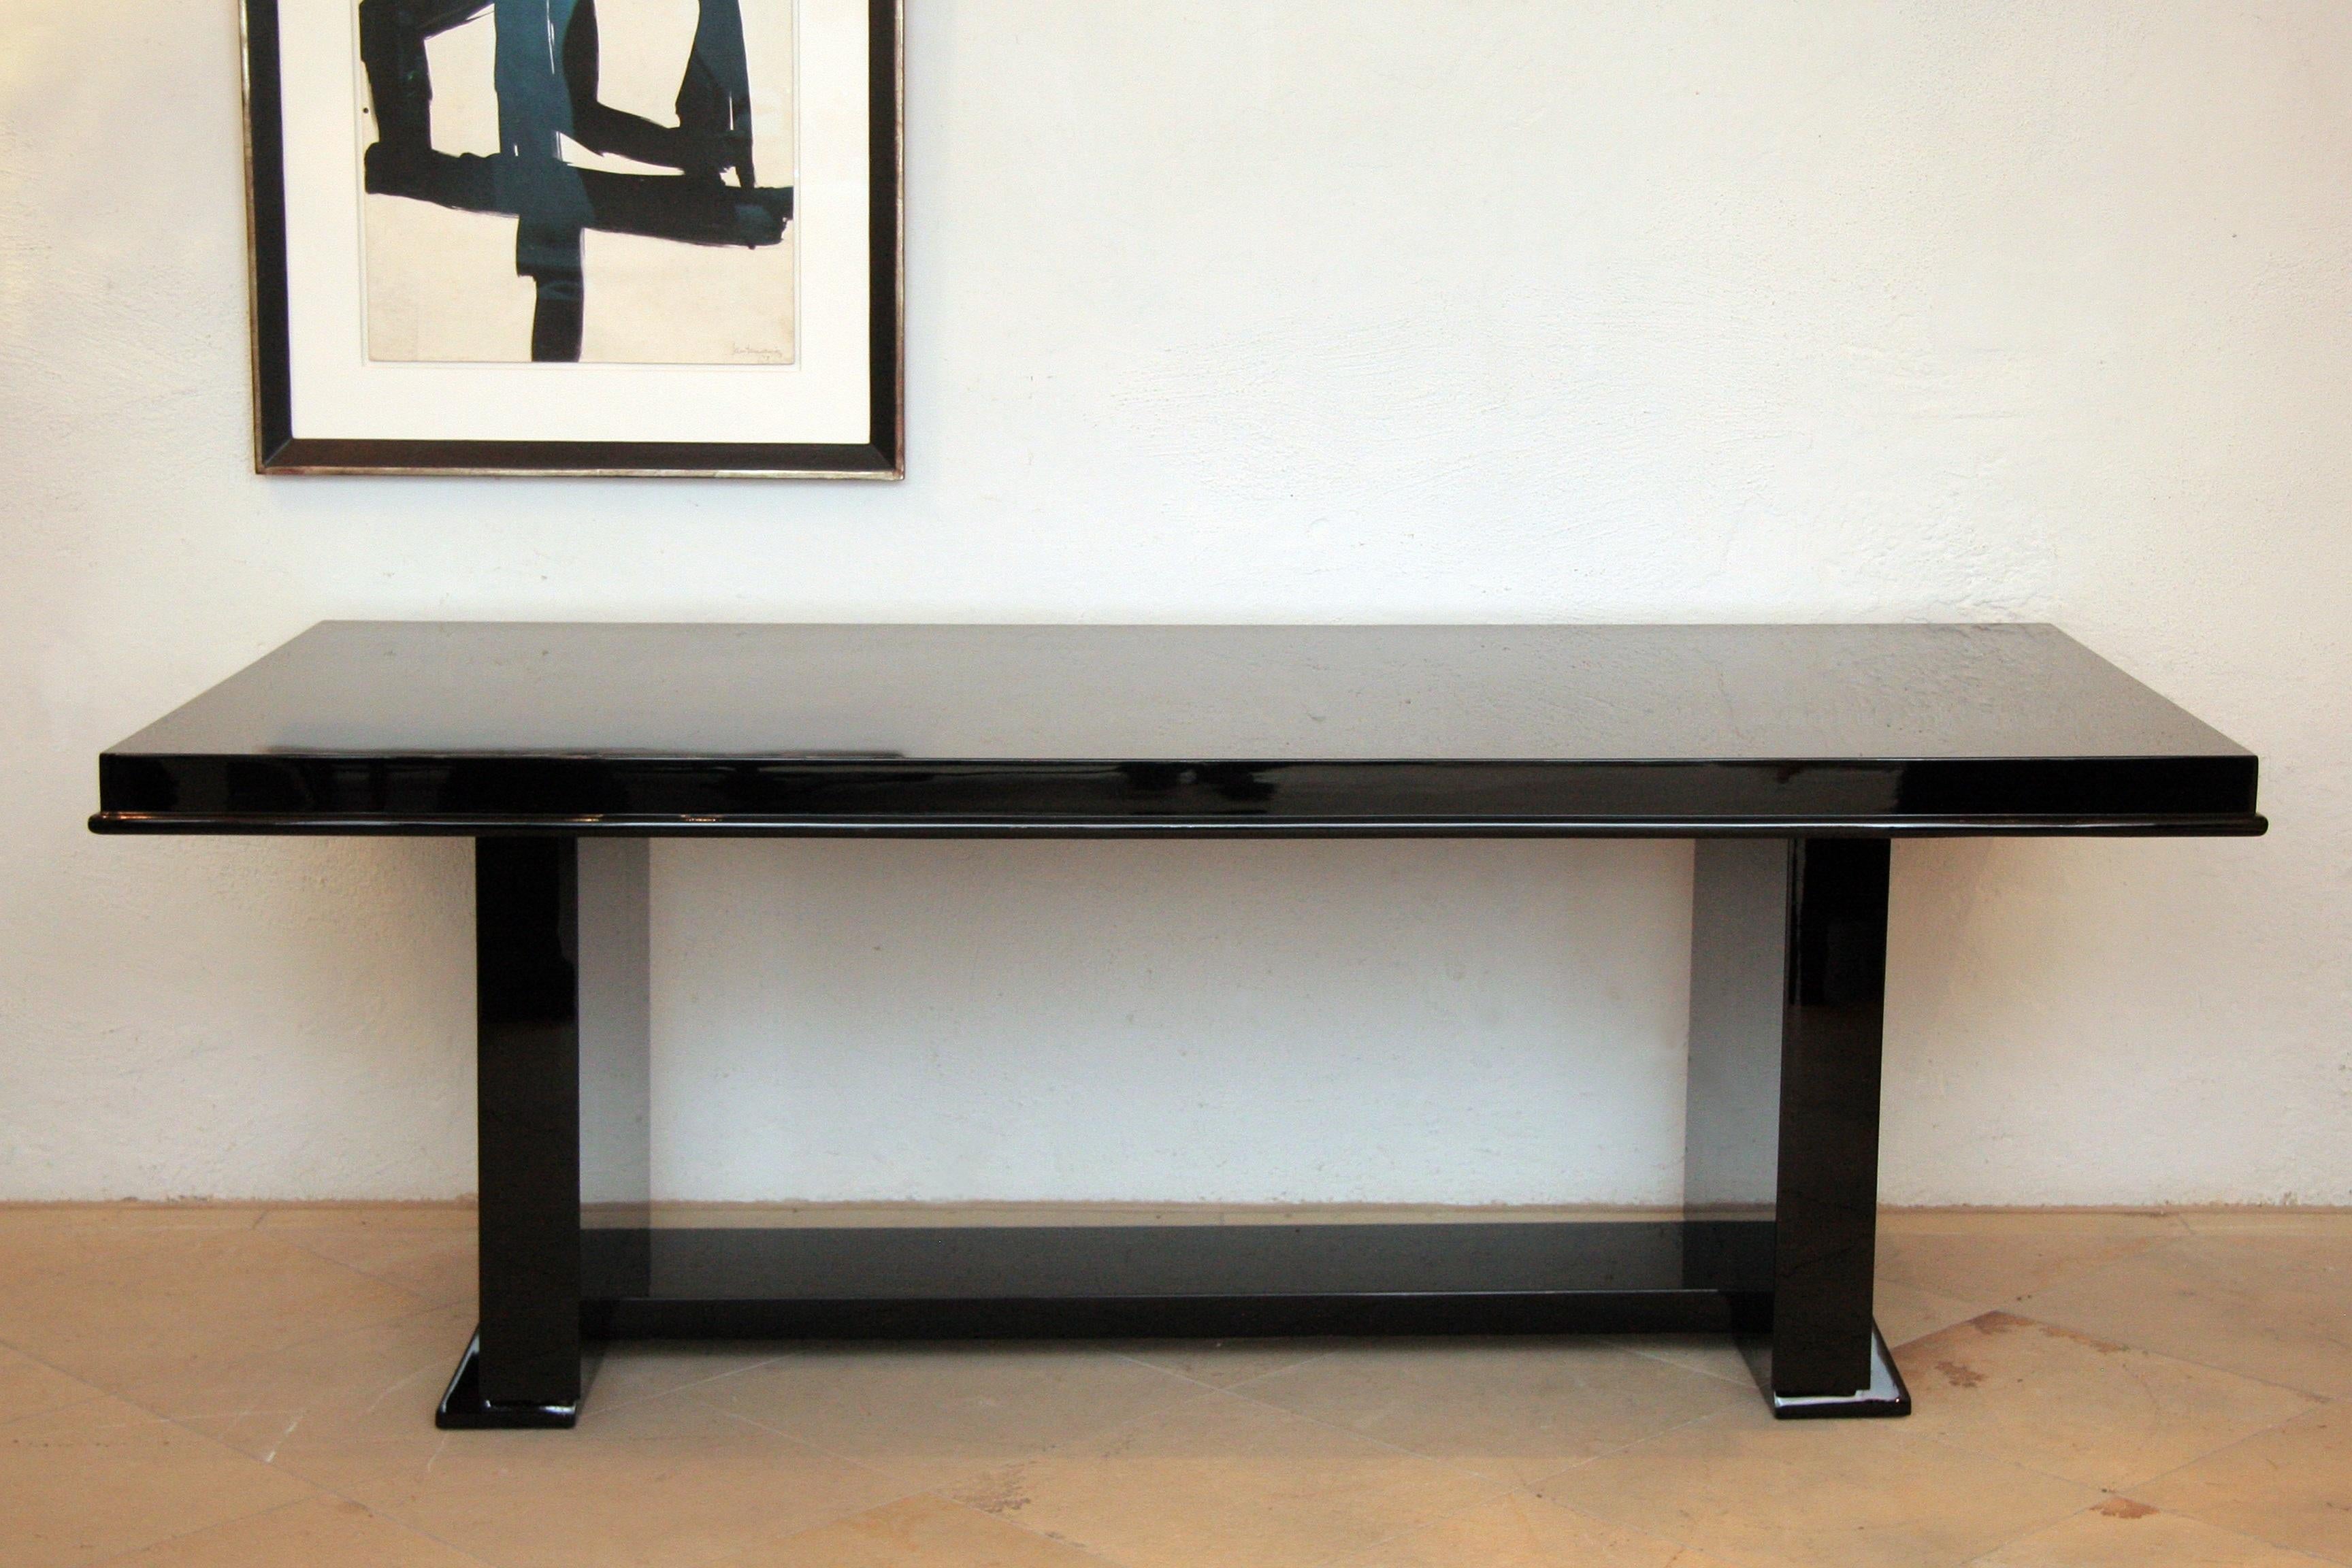 Lacquered French Cubistic Shaped Art Deco Dining Table / Desk - Black Lacquer 1930s